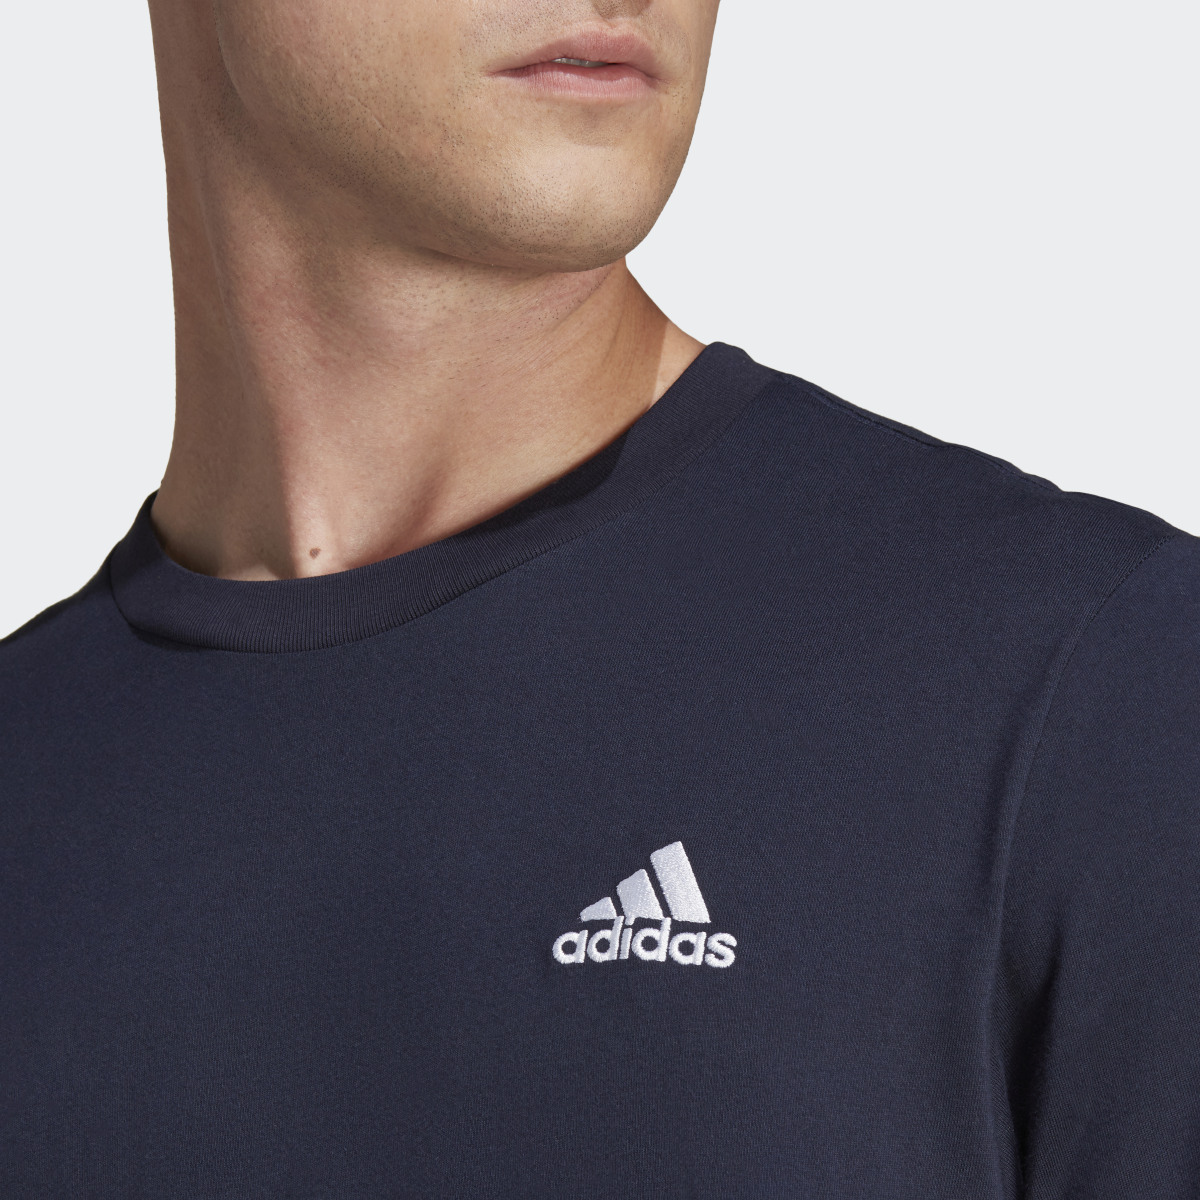 Adidas Essentials Single Jersey Embroidered Small Logo T-Shirt. 6